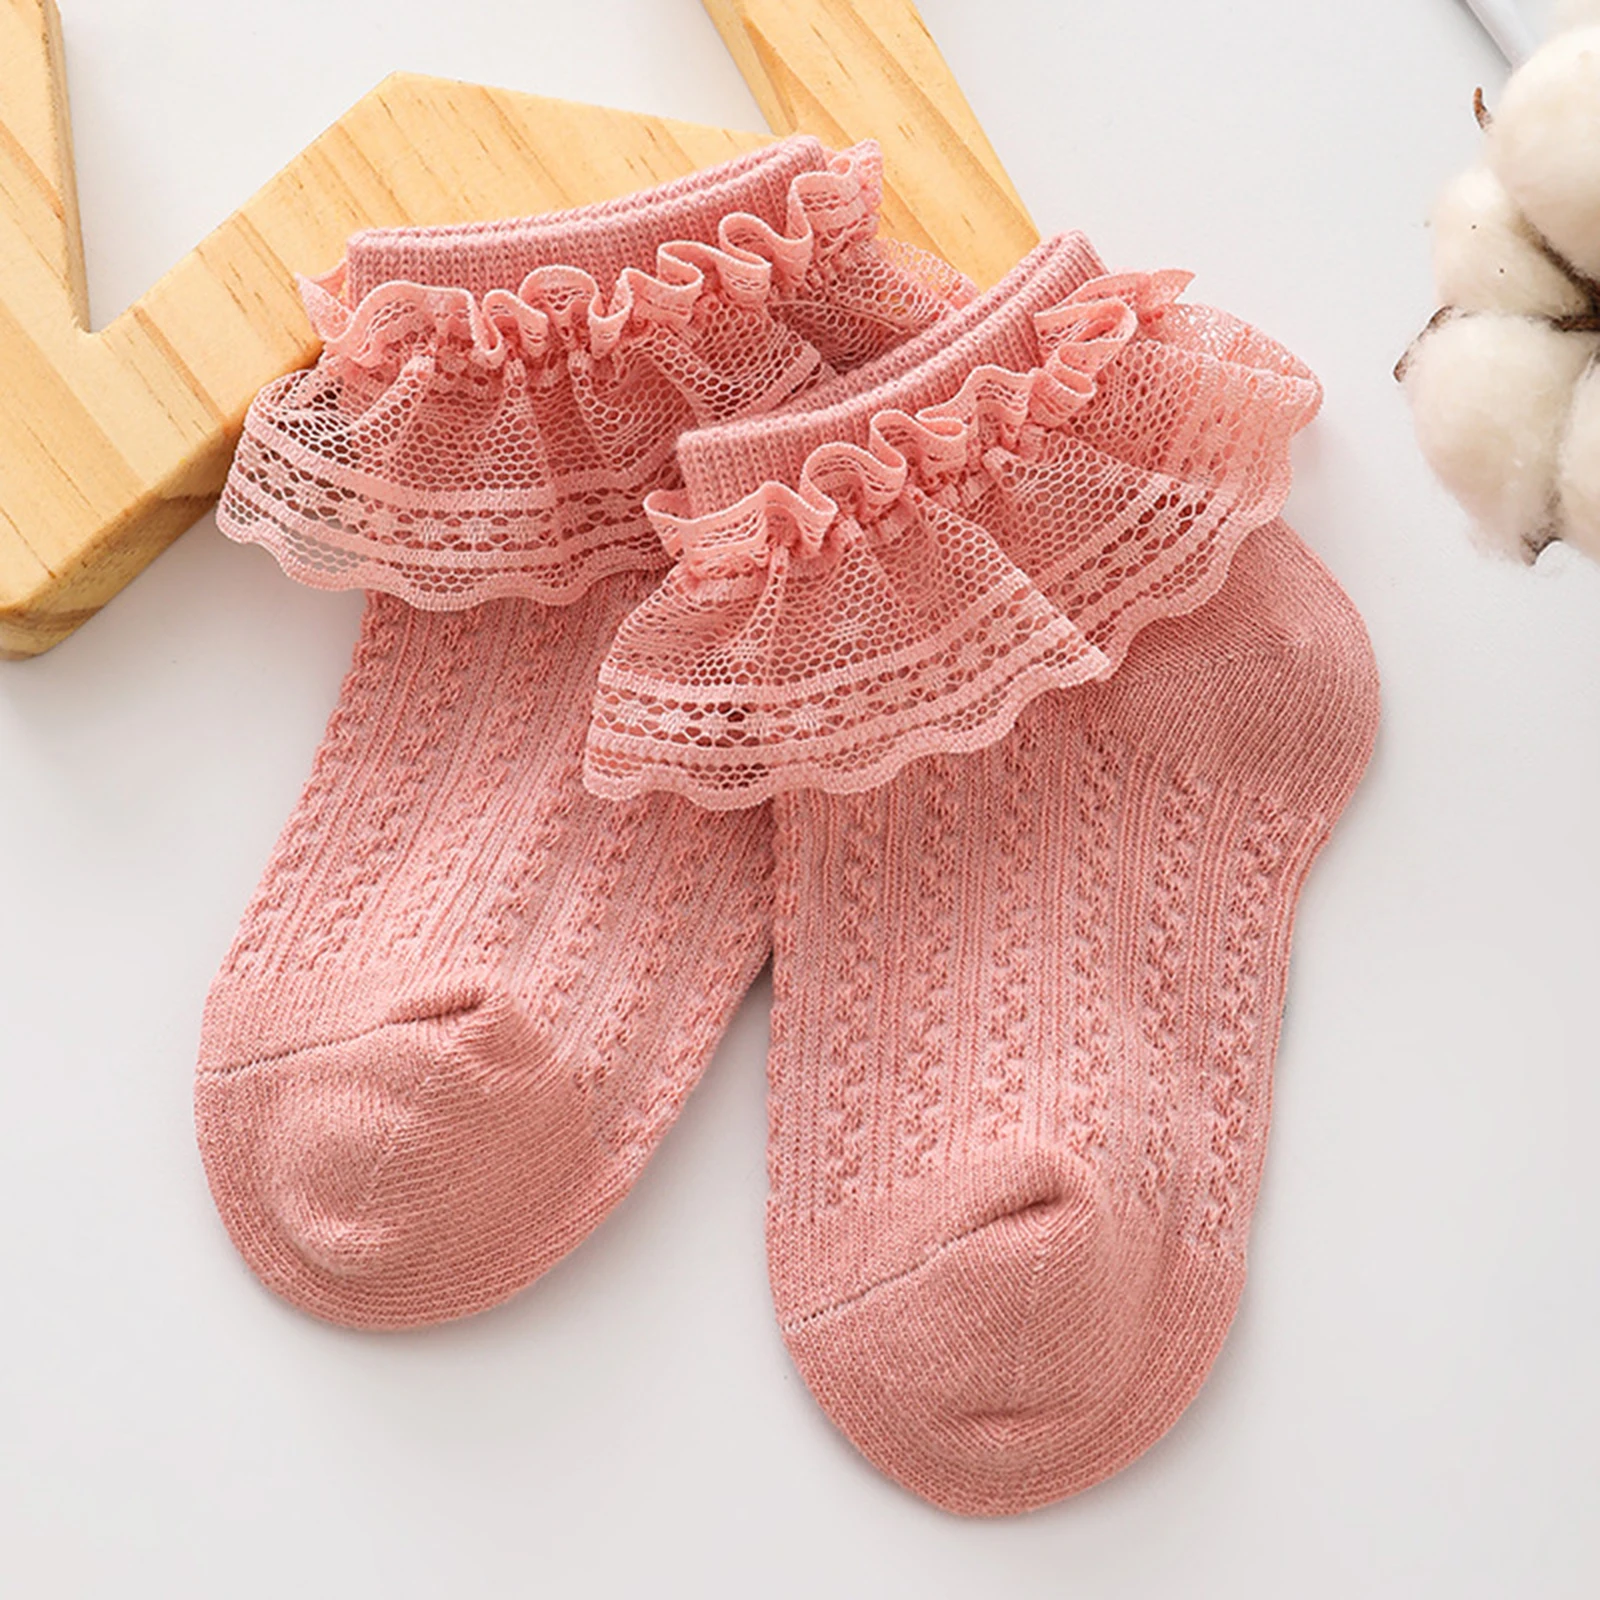 Children Girls Lace Socks Cute Soft Breathable Cotton Baby Ruffle Princess Dress Walking Ankle Short Socks for Toddler Accessory